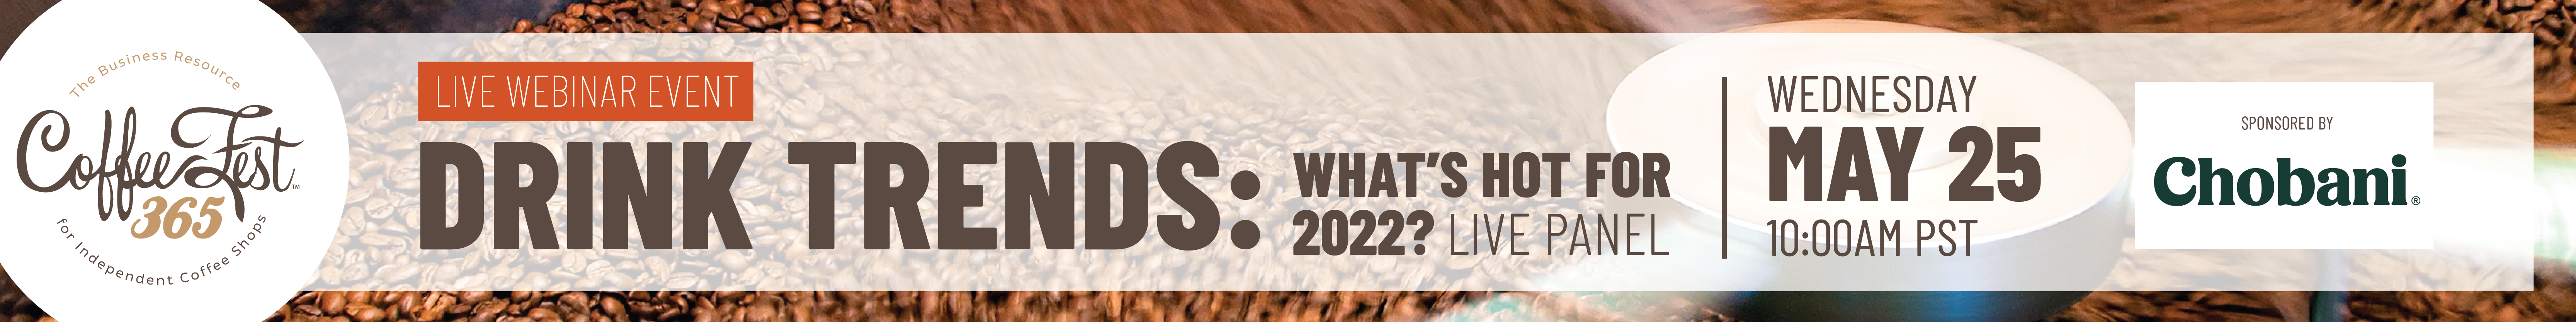 Drink Trends: What's Hot in 2022?